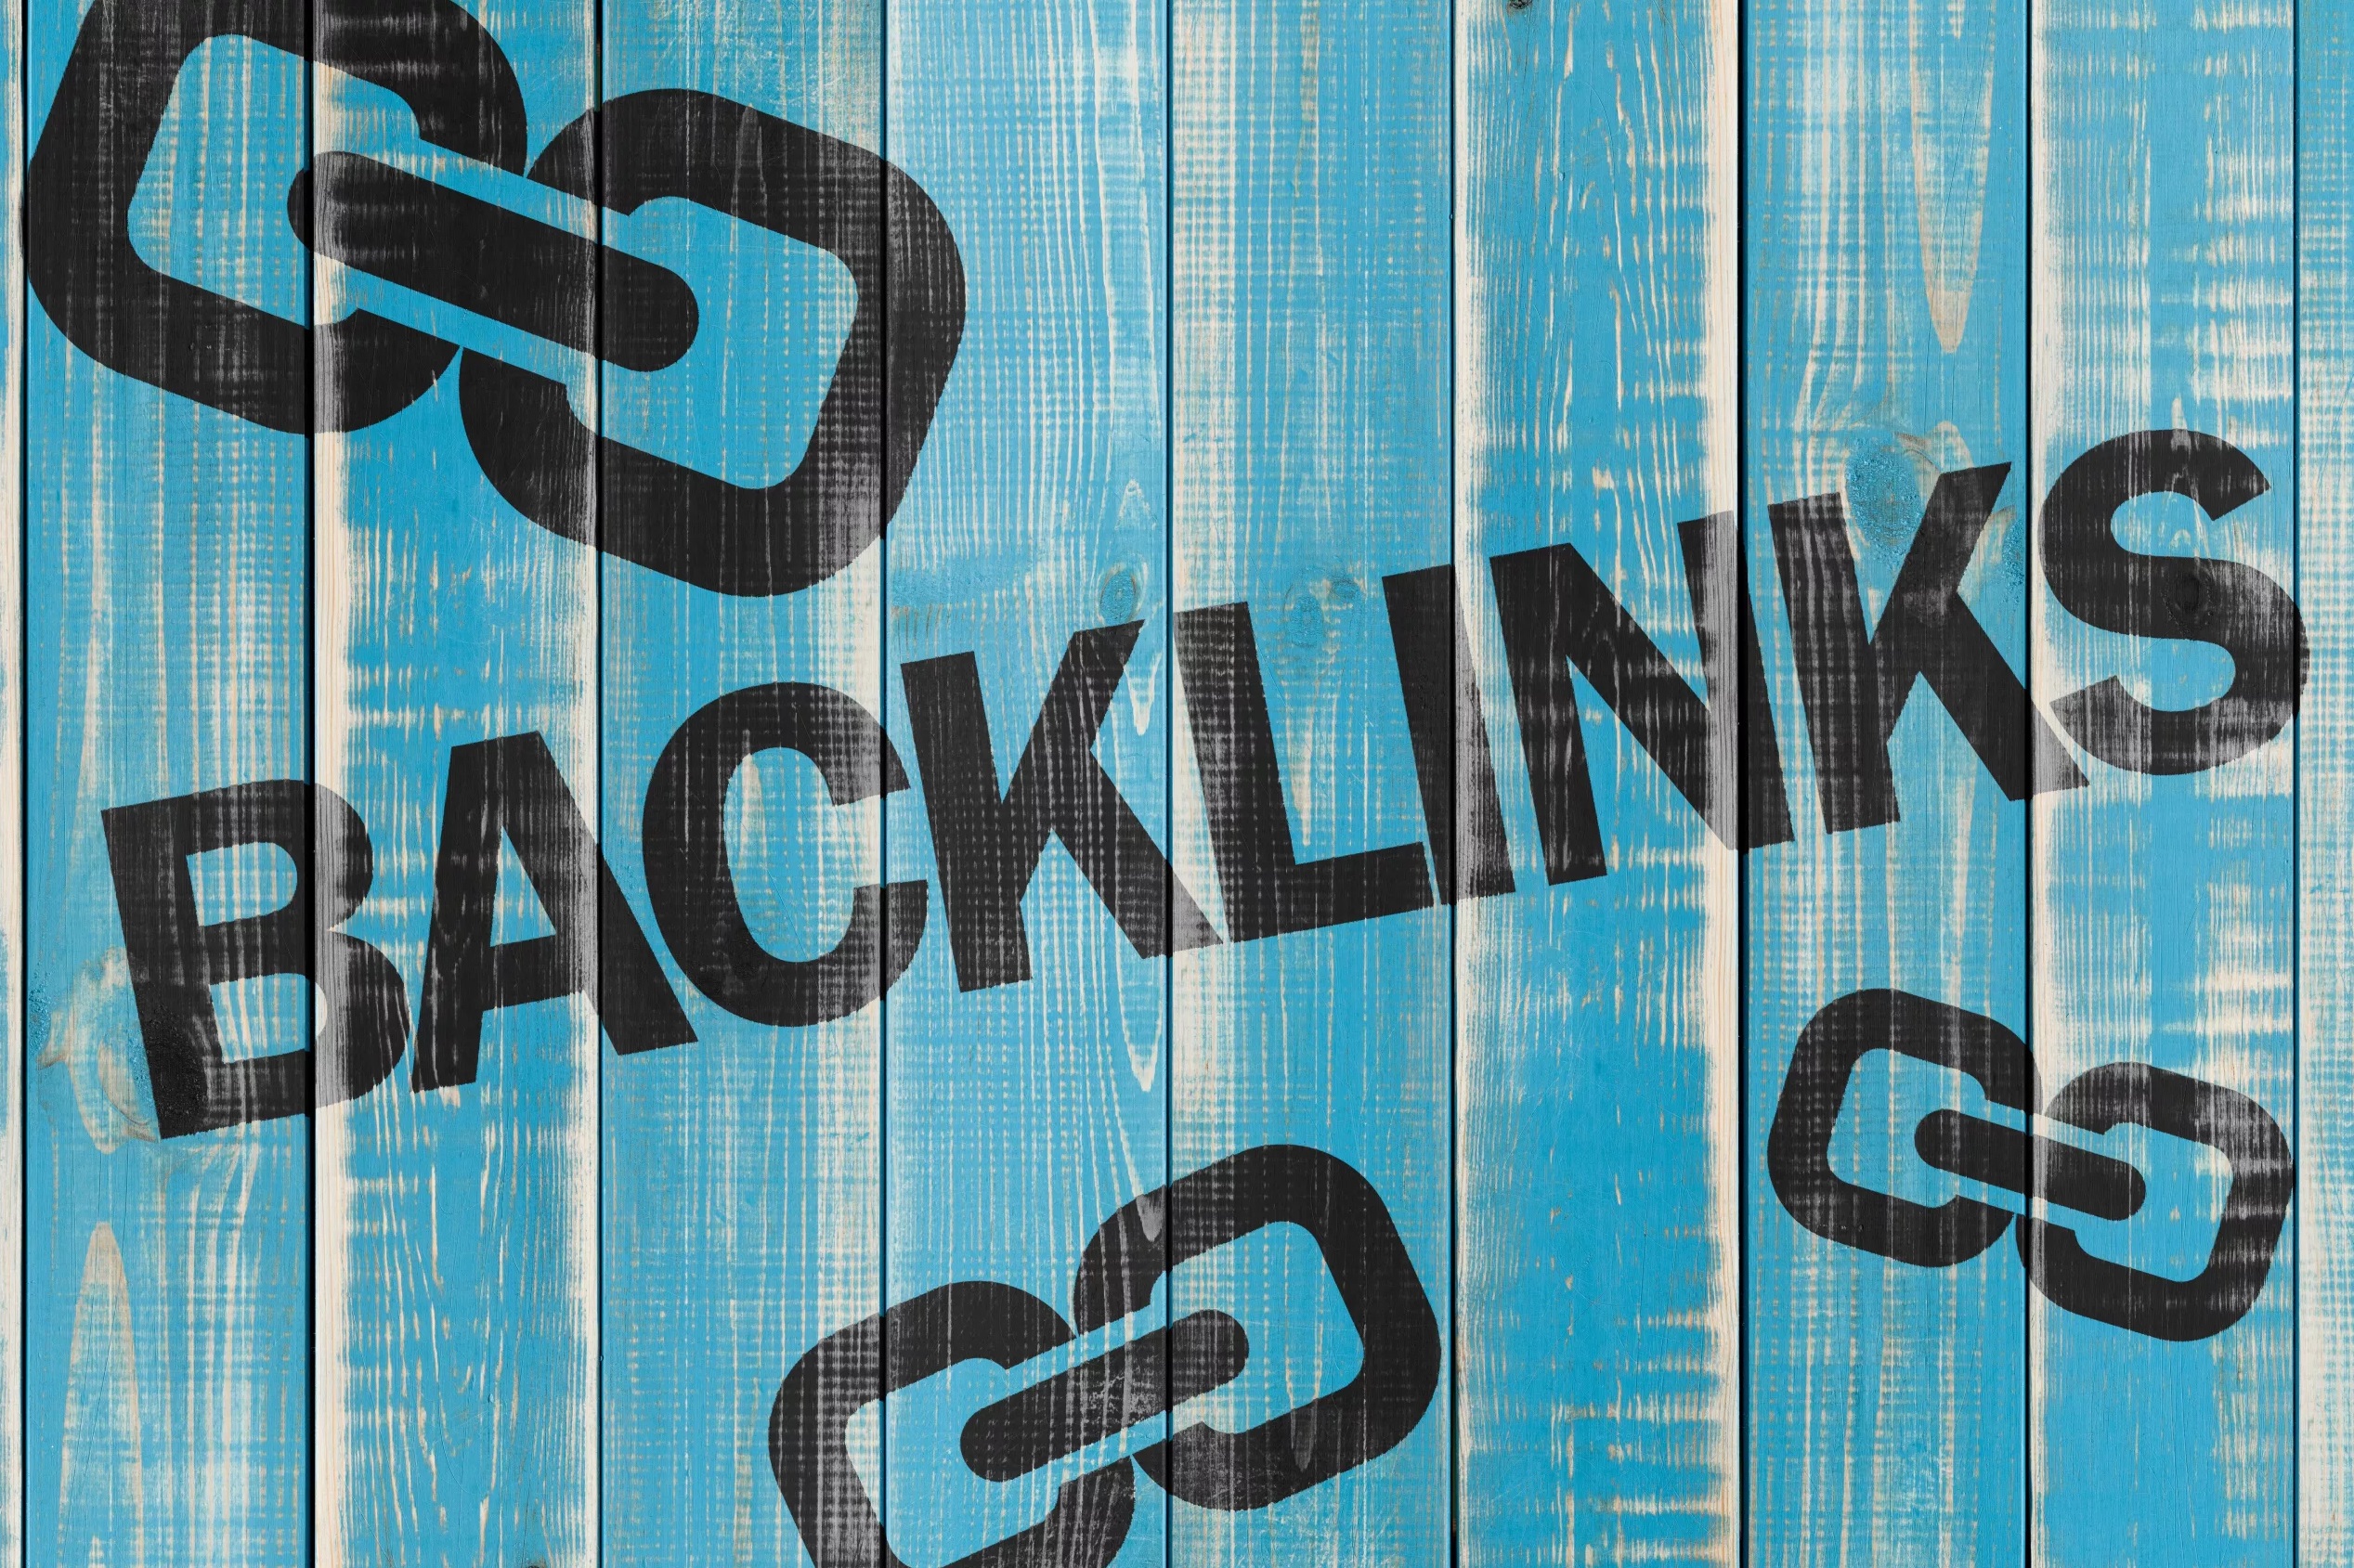 the truth about backlinks